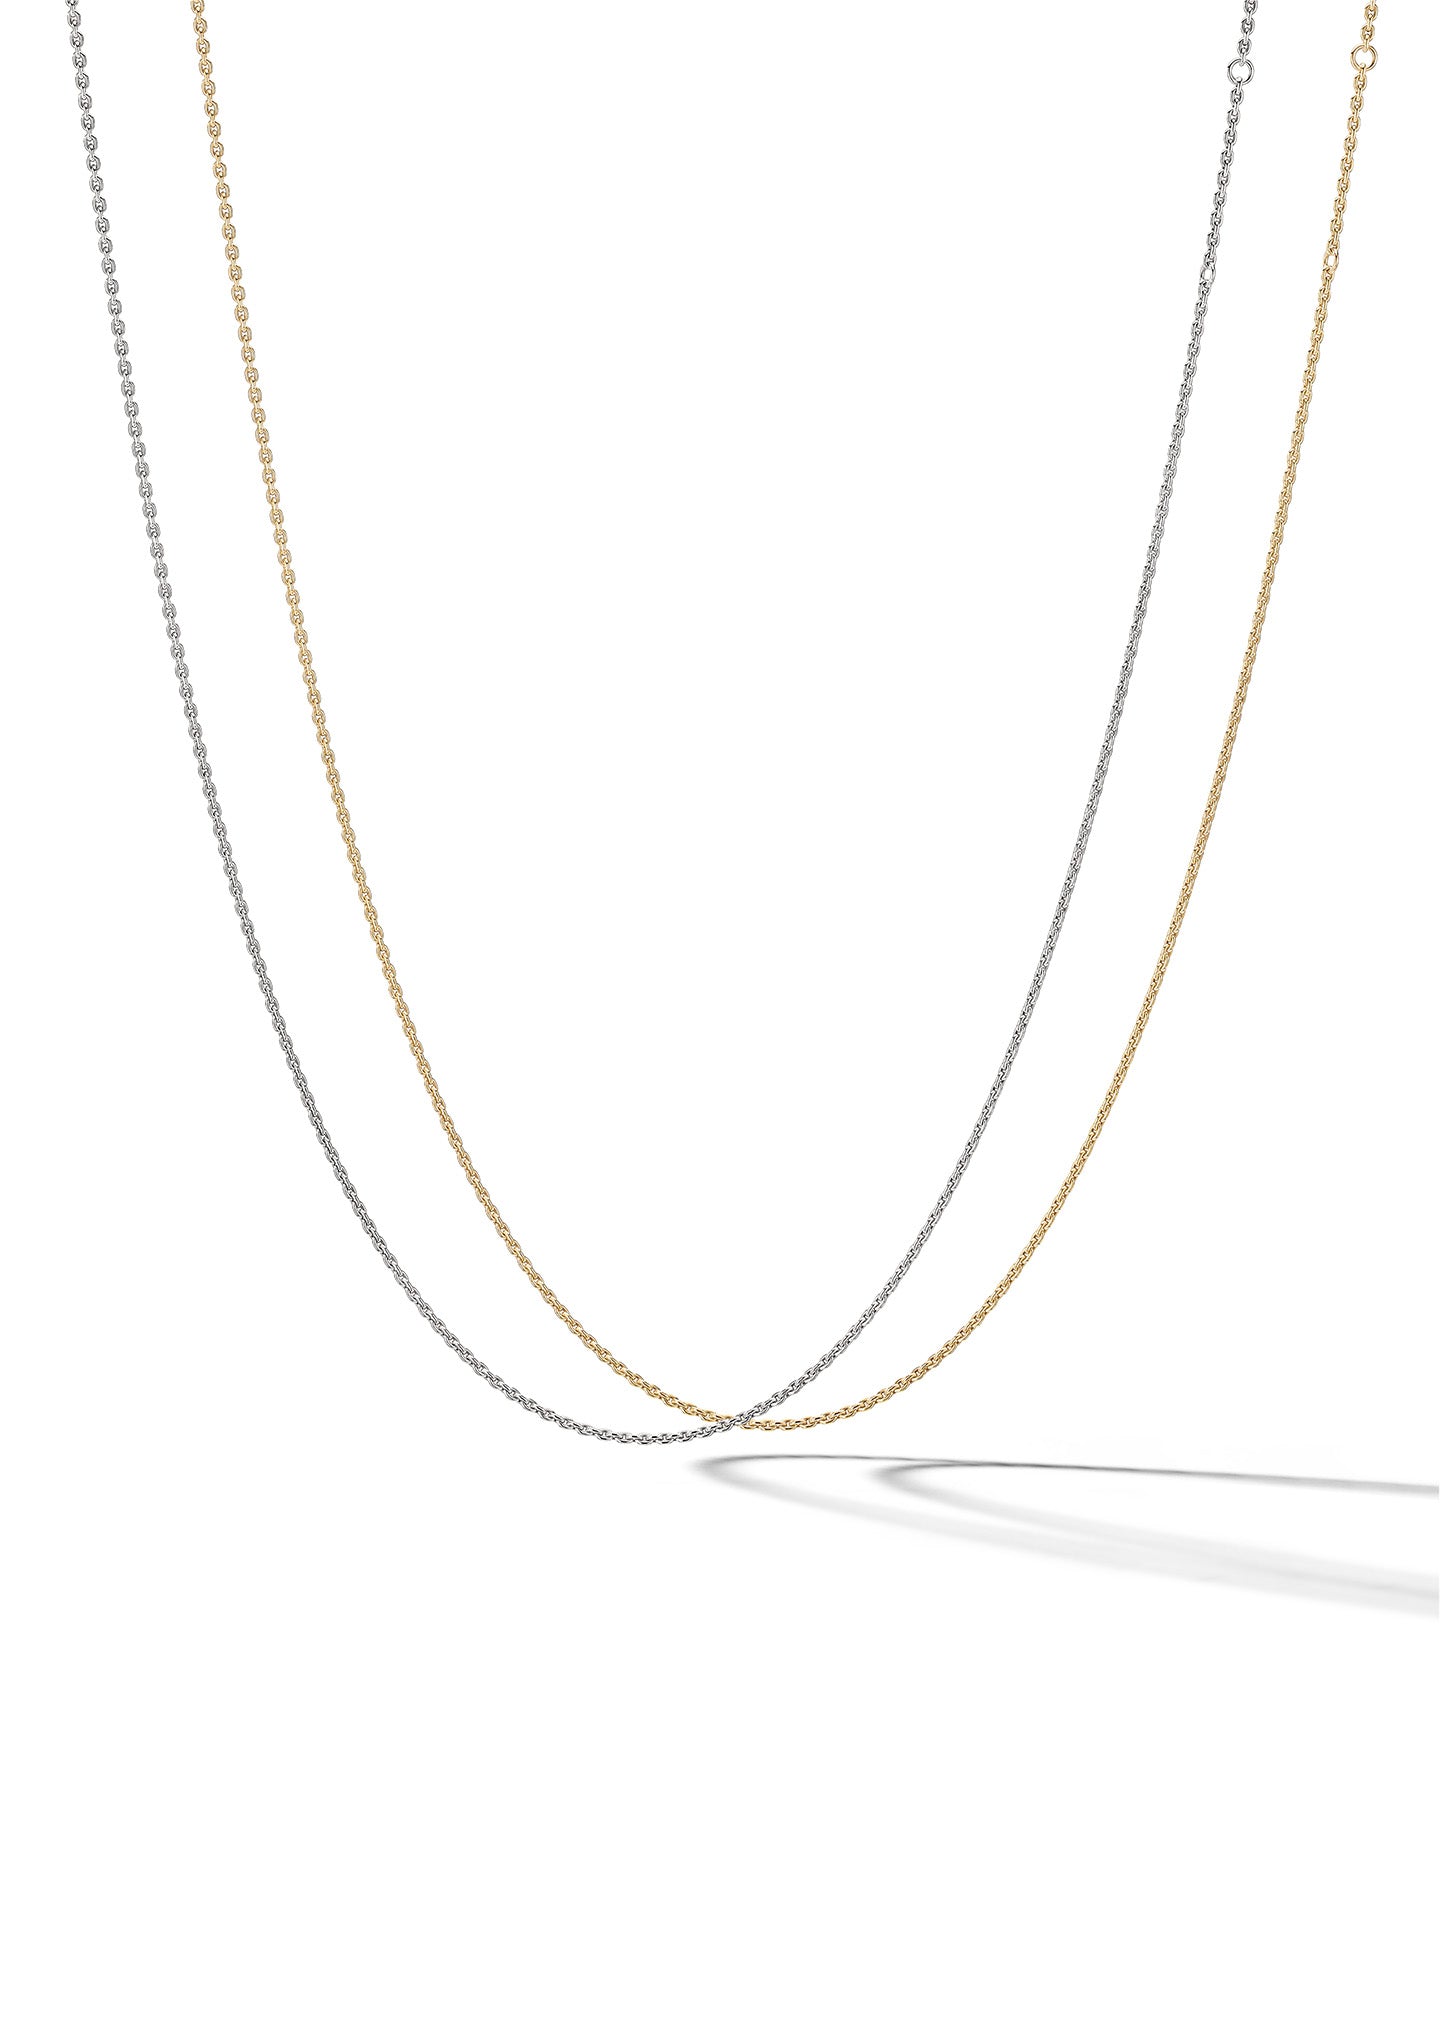 The 1.6mm Trace Chain gallery image